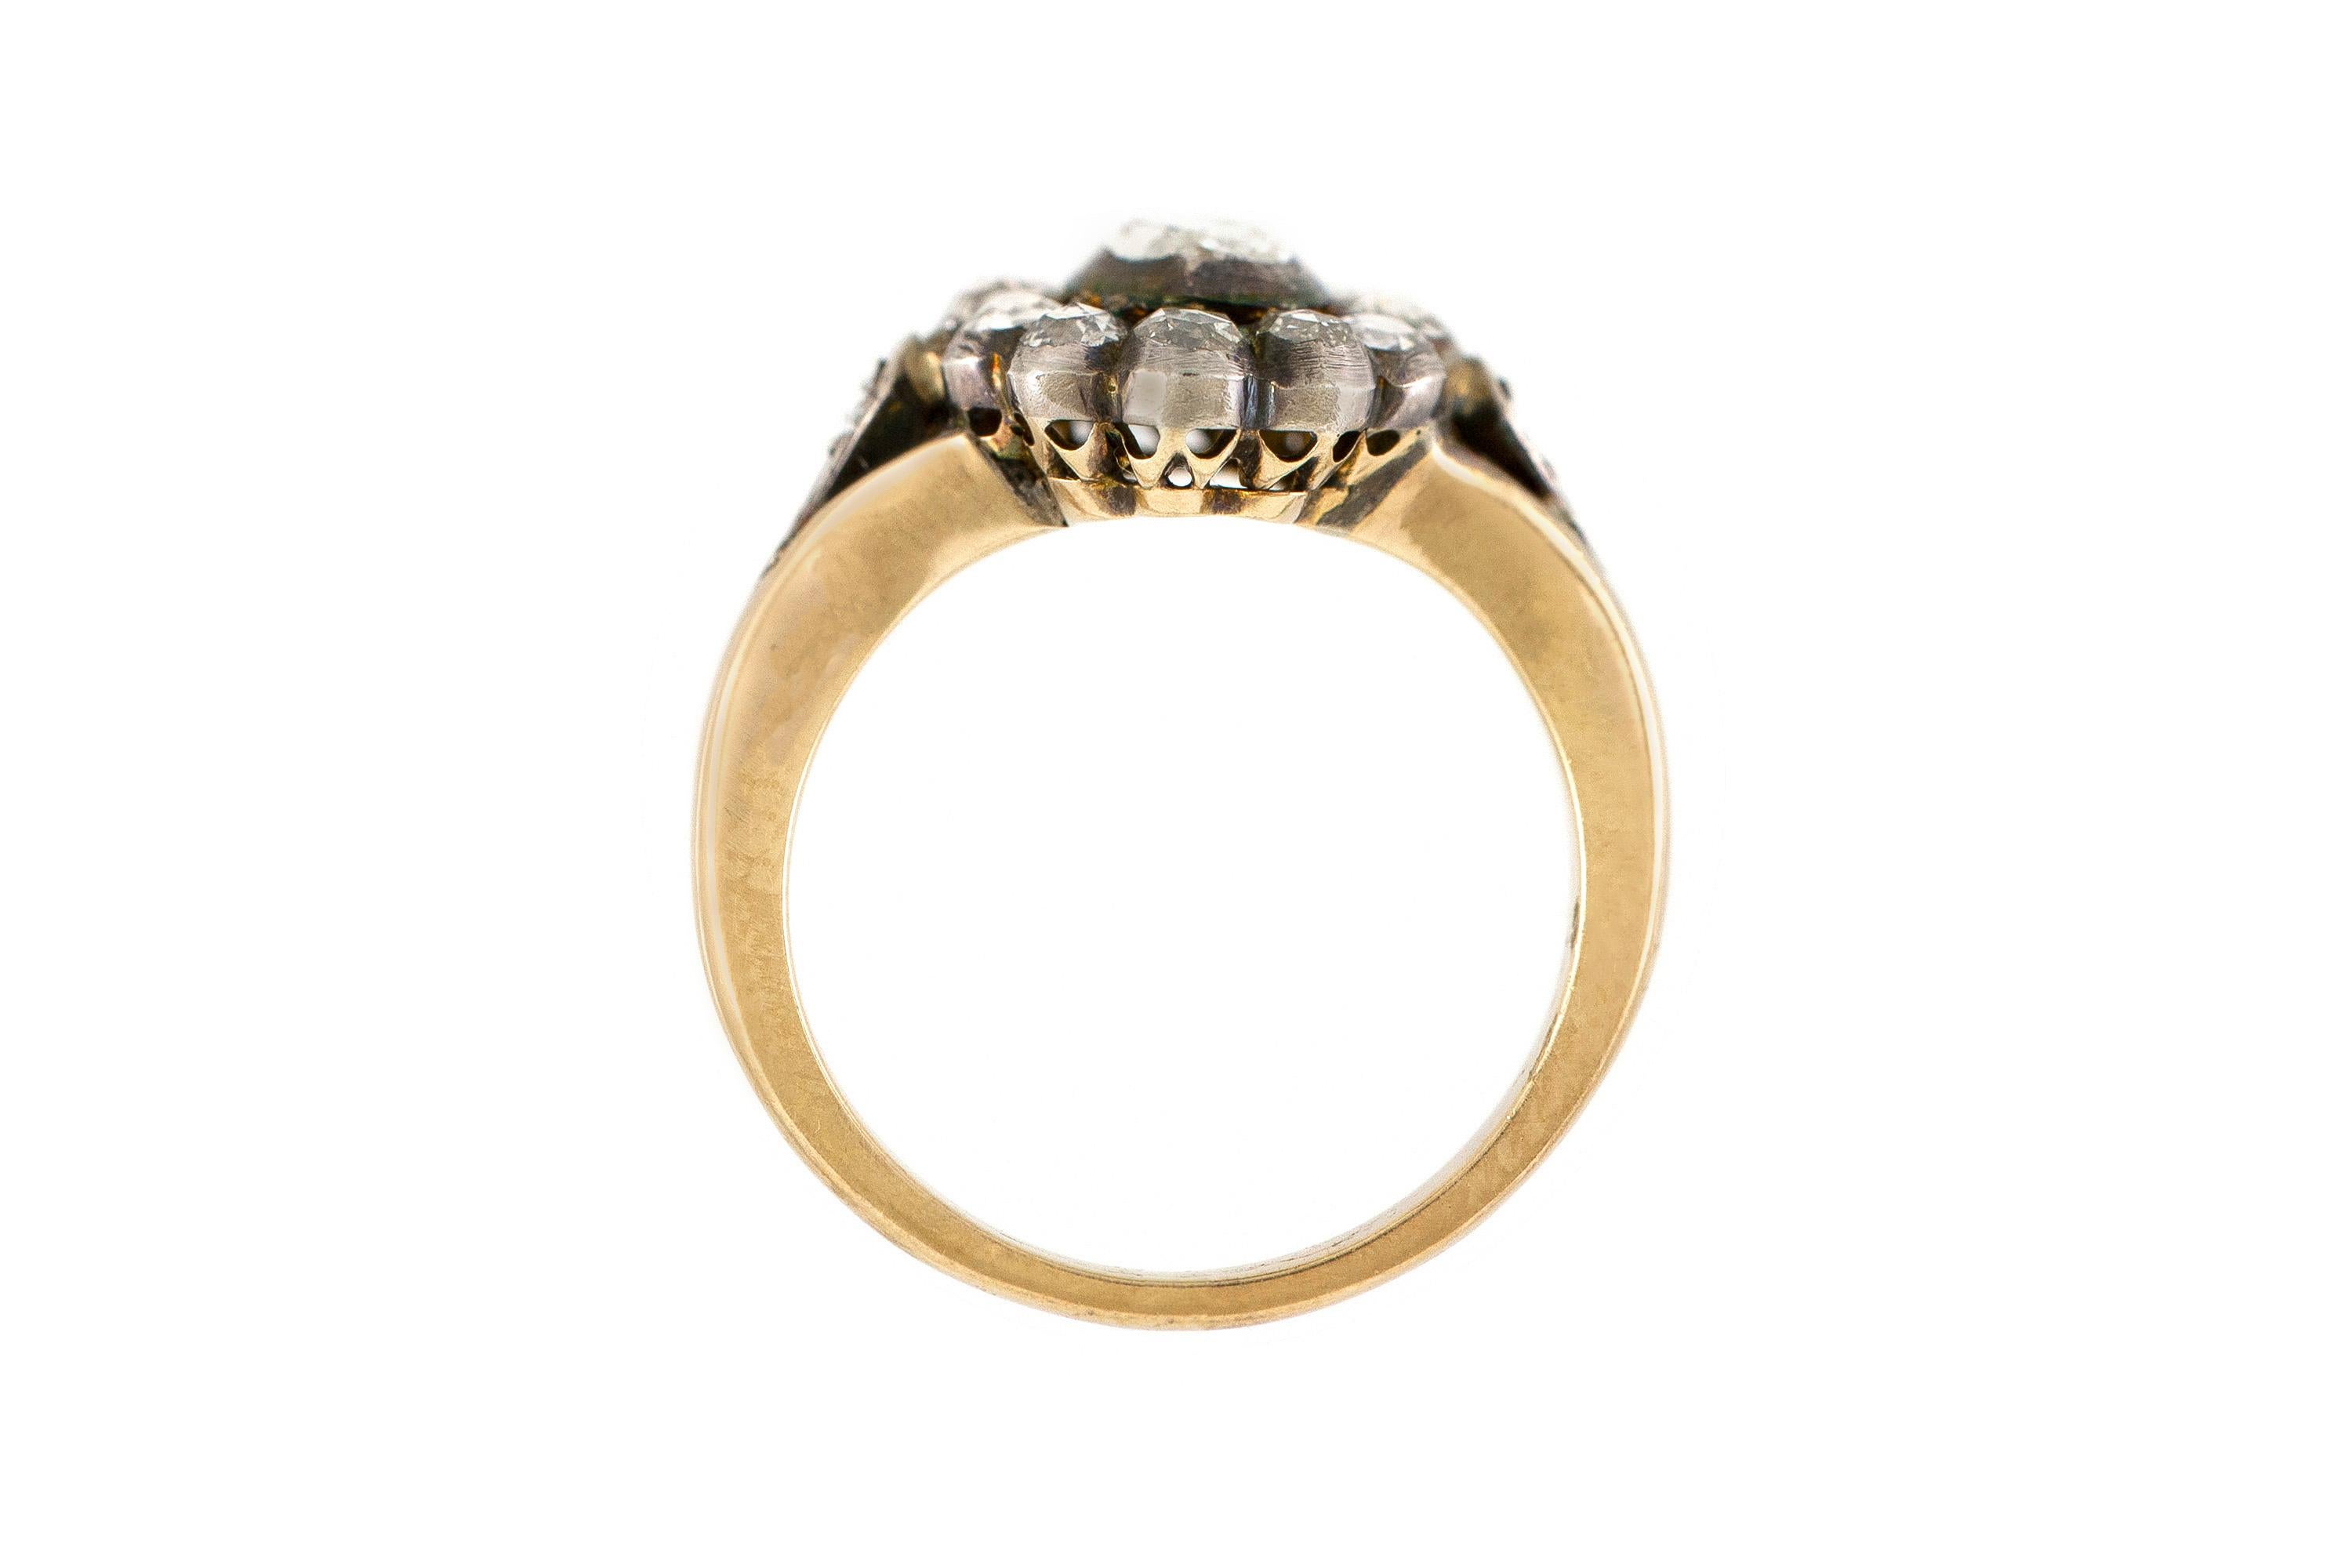 The ring is finely crafetd in 18k yellow gold and silver with rose cut diamonds weighing approximately total of 2.20 carat.